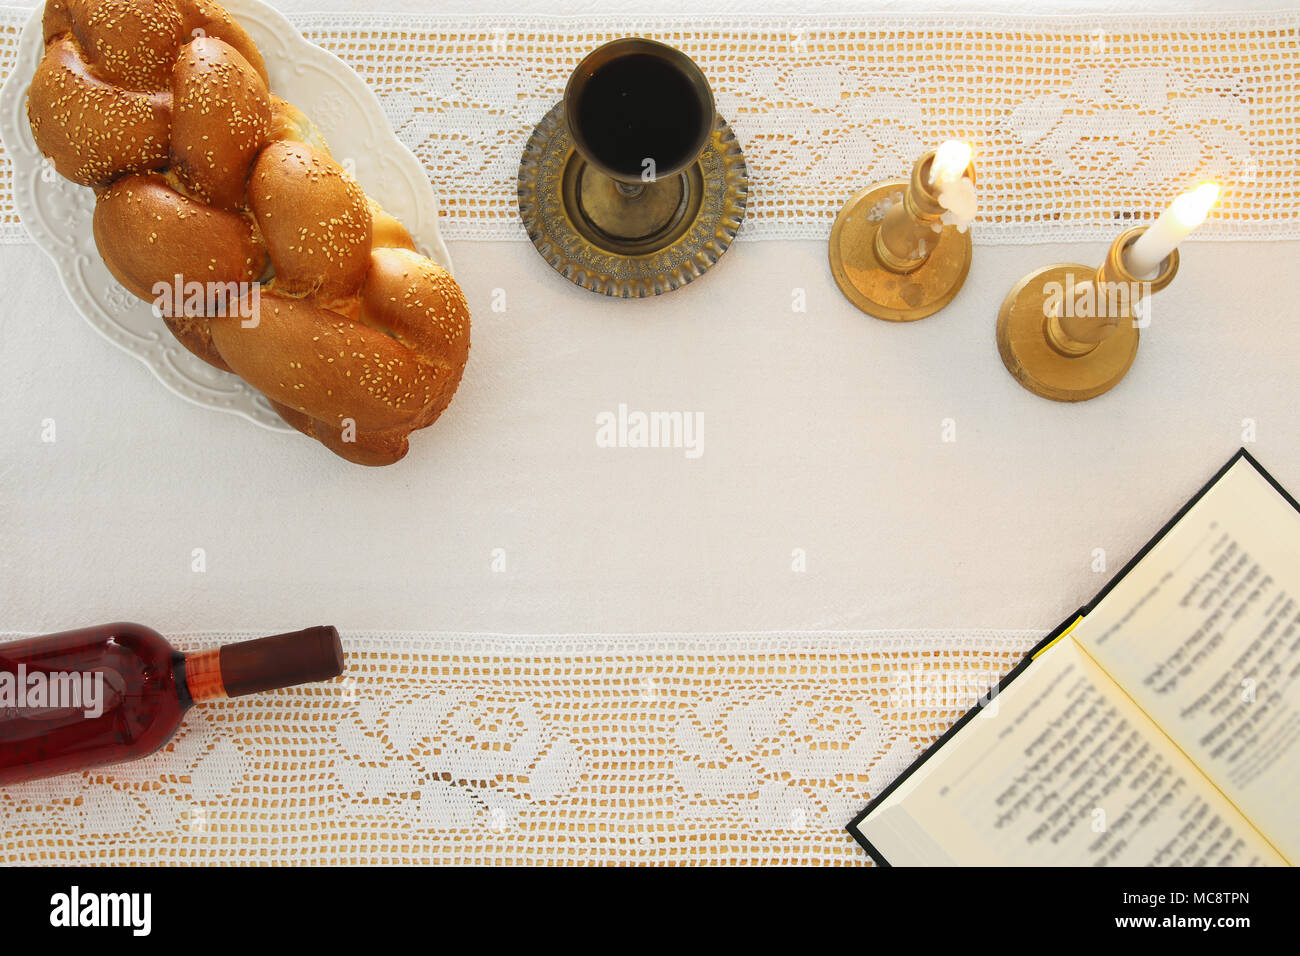 shabbat image. challah bread, shabbat wine and candles on the table. Top view Stock Photo